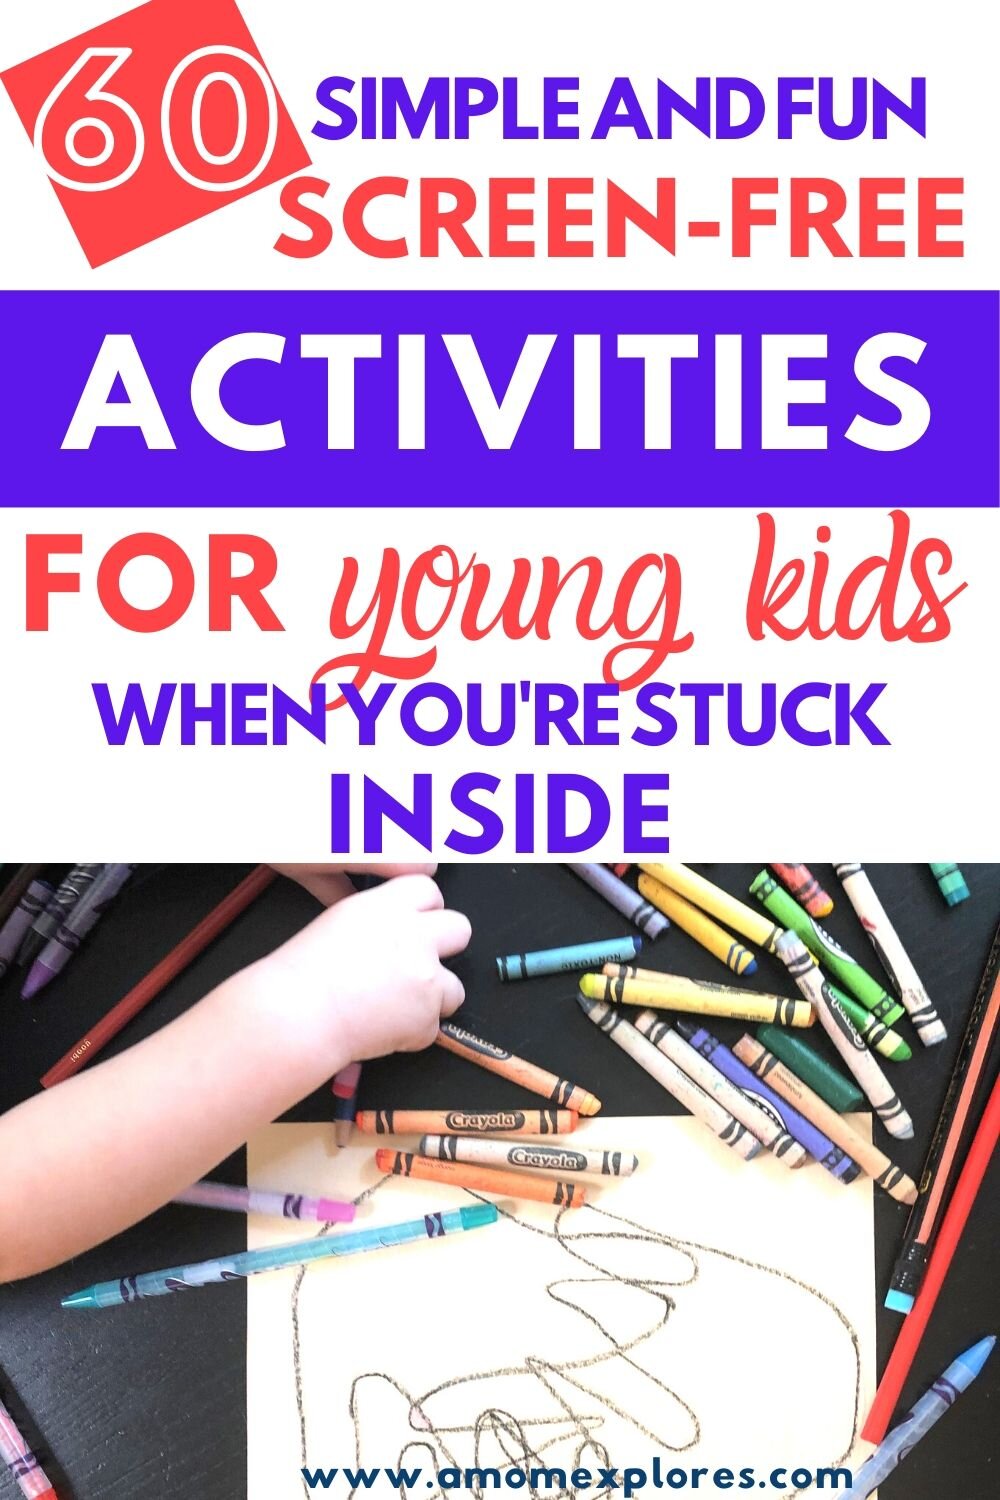 60 screen free activities for young kids .jpg